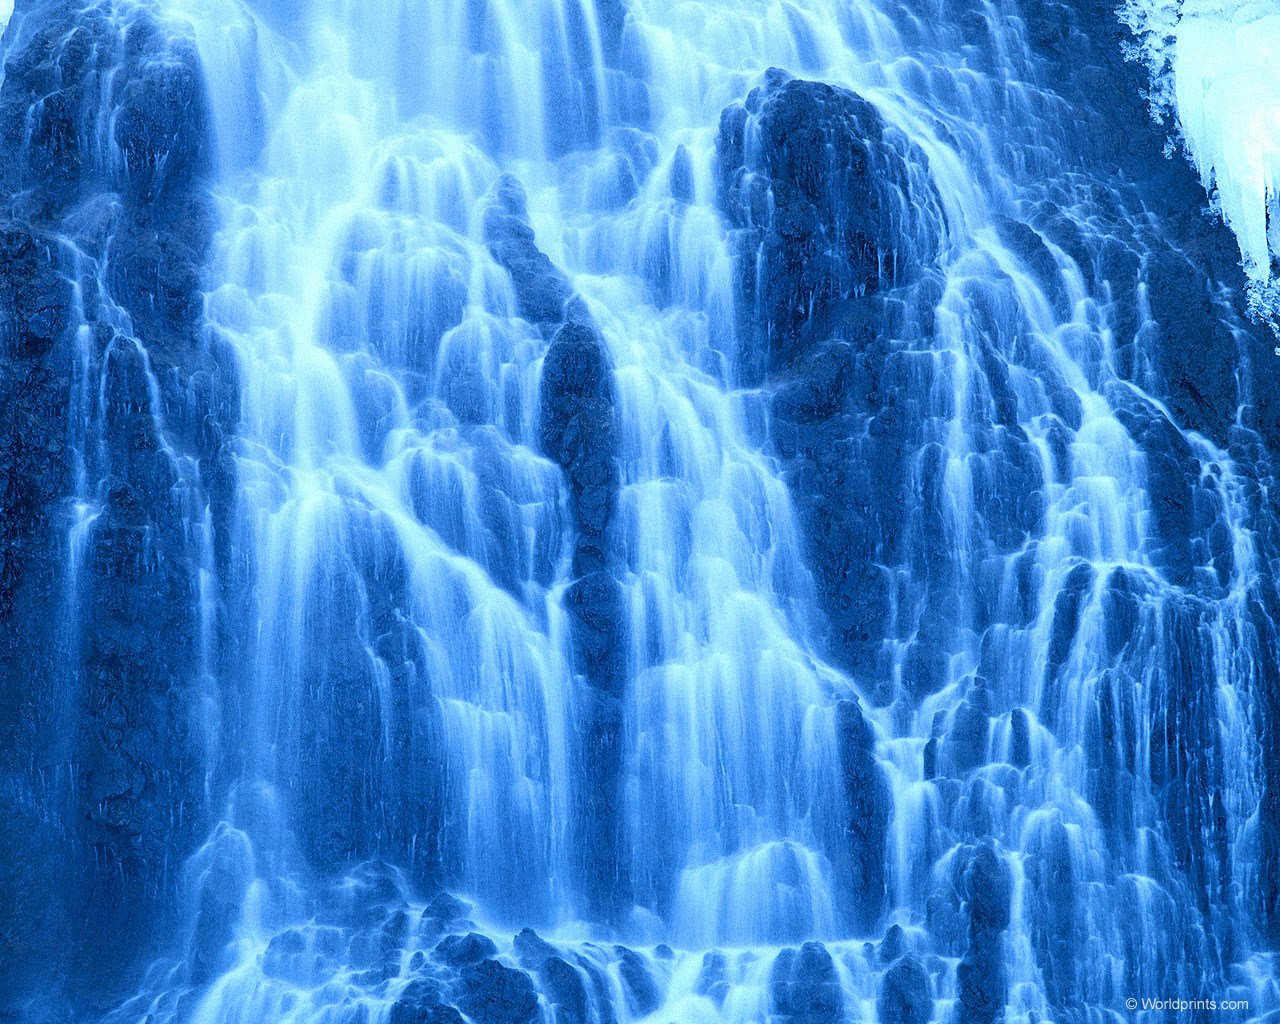 Download High quality Waterfalls wallpaper / Nature / 1280x1024